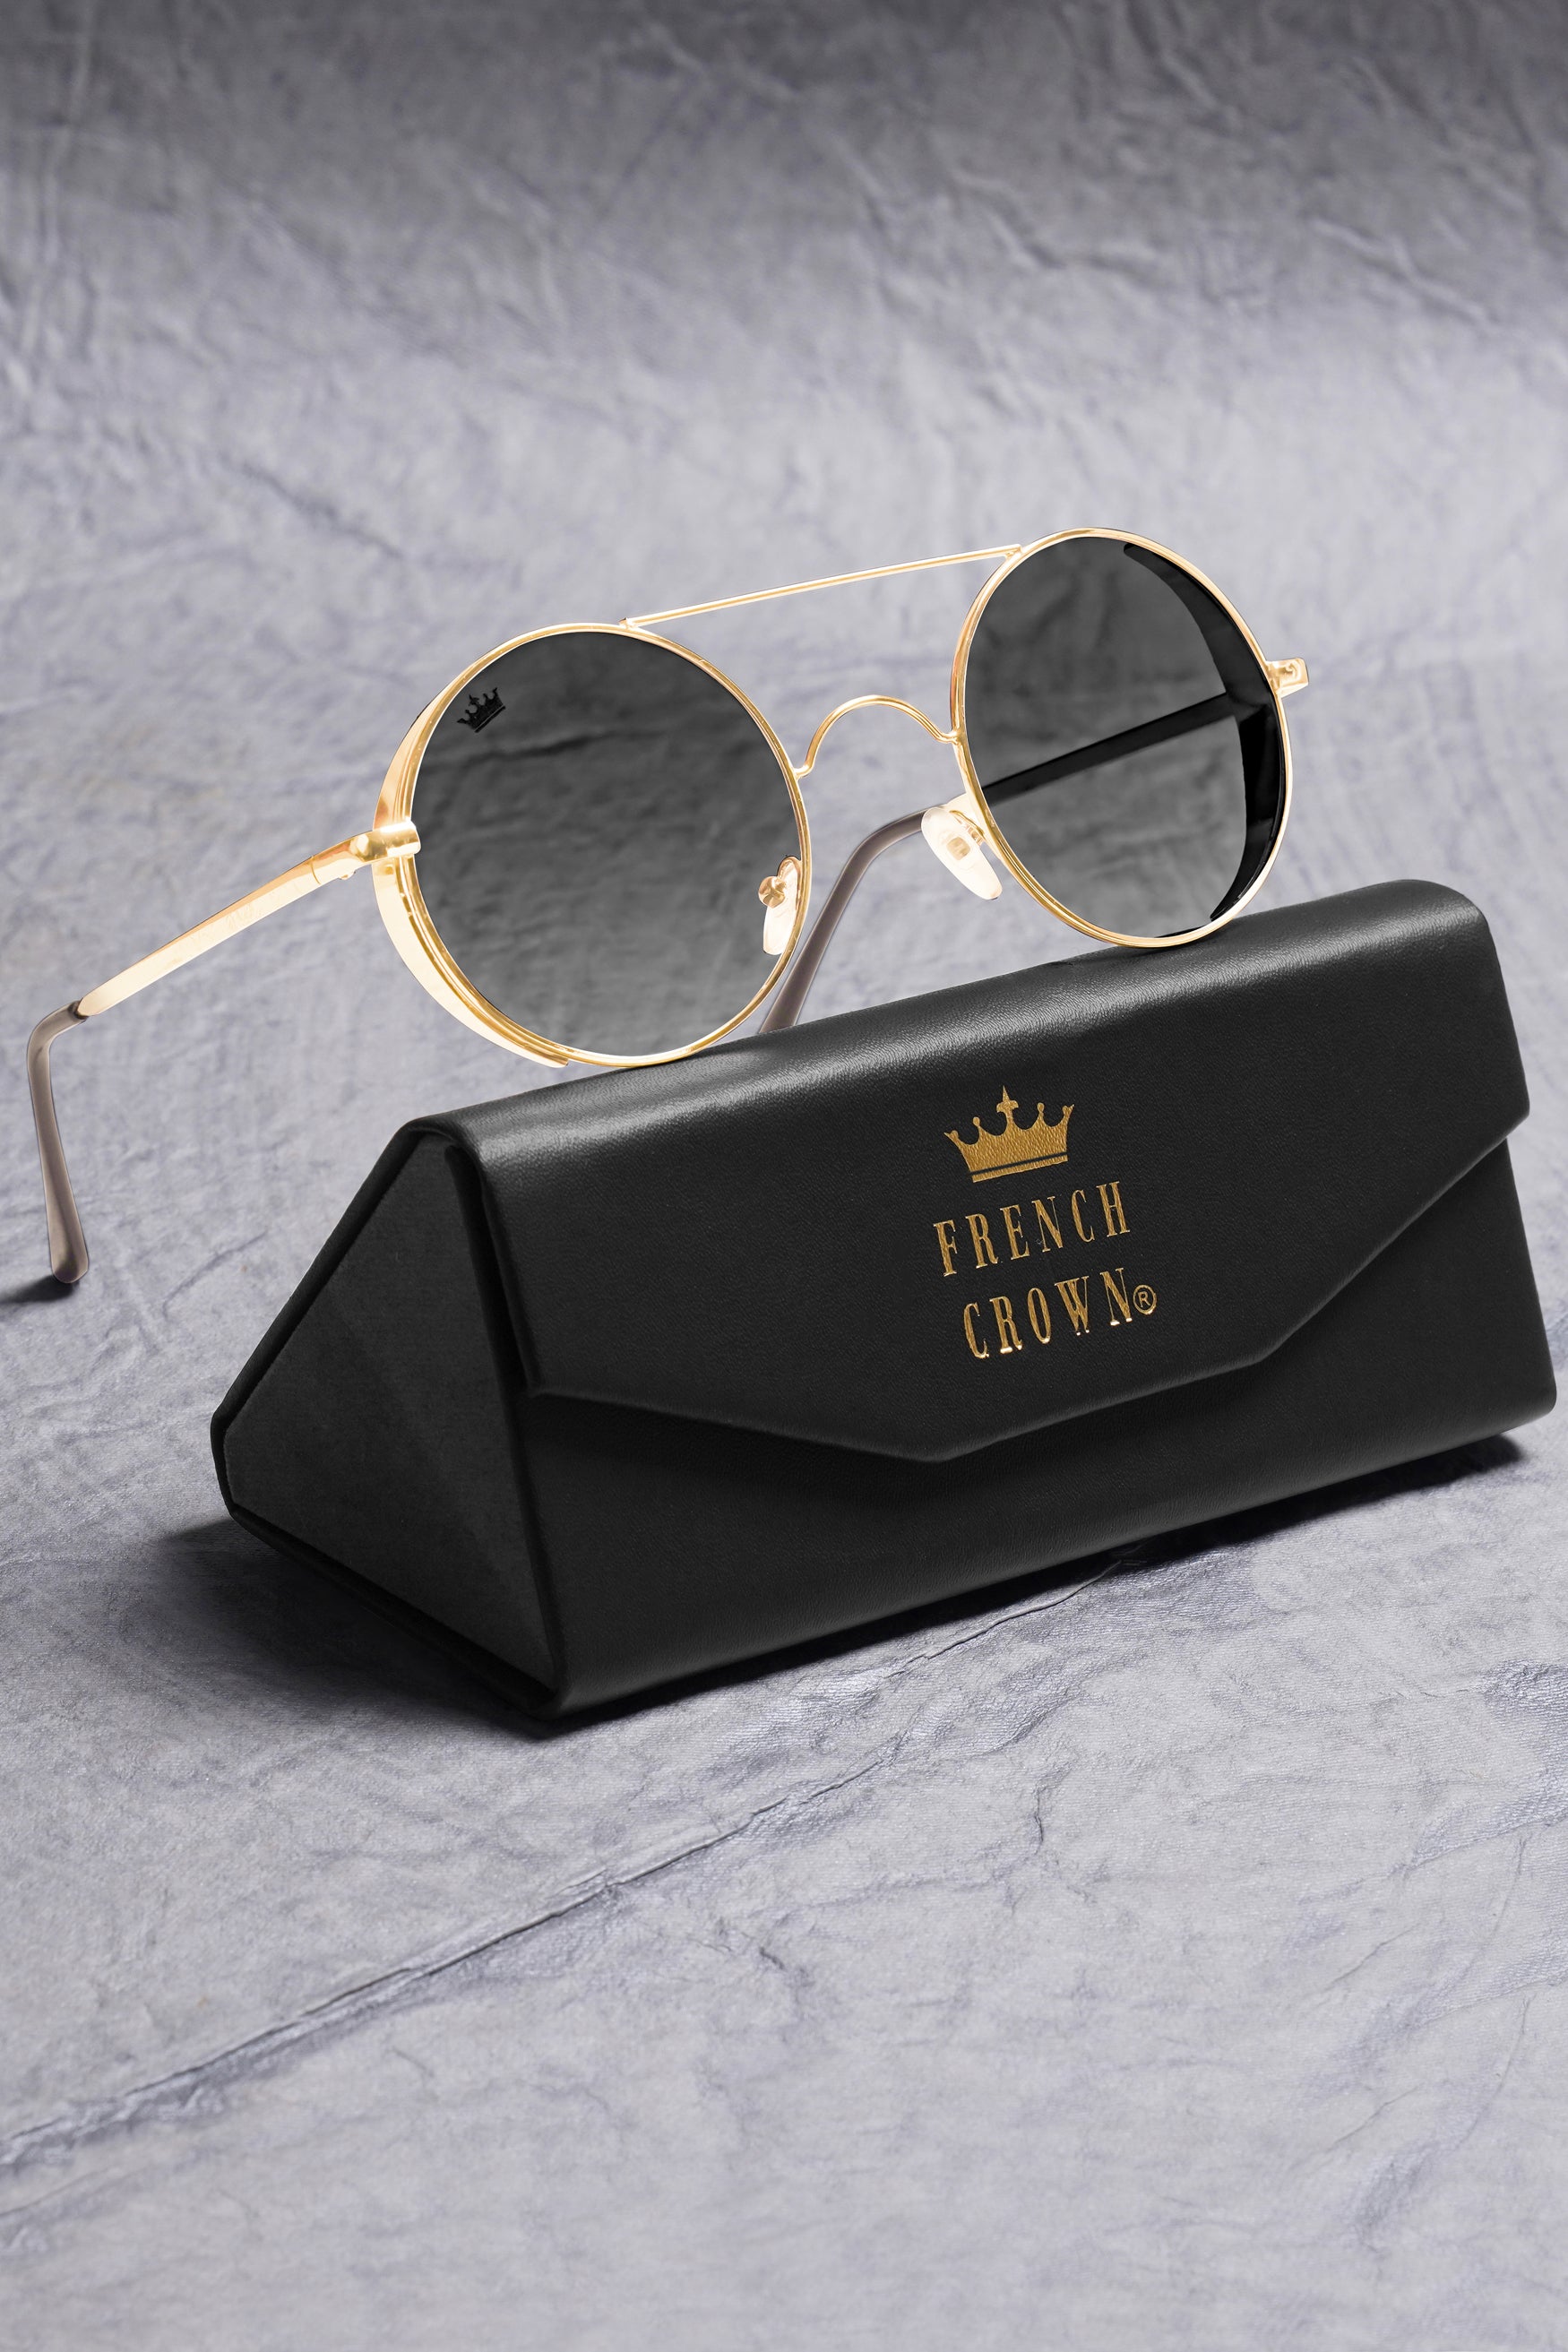 The top french Eyewear brands you should know about for 2019